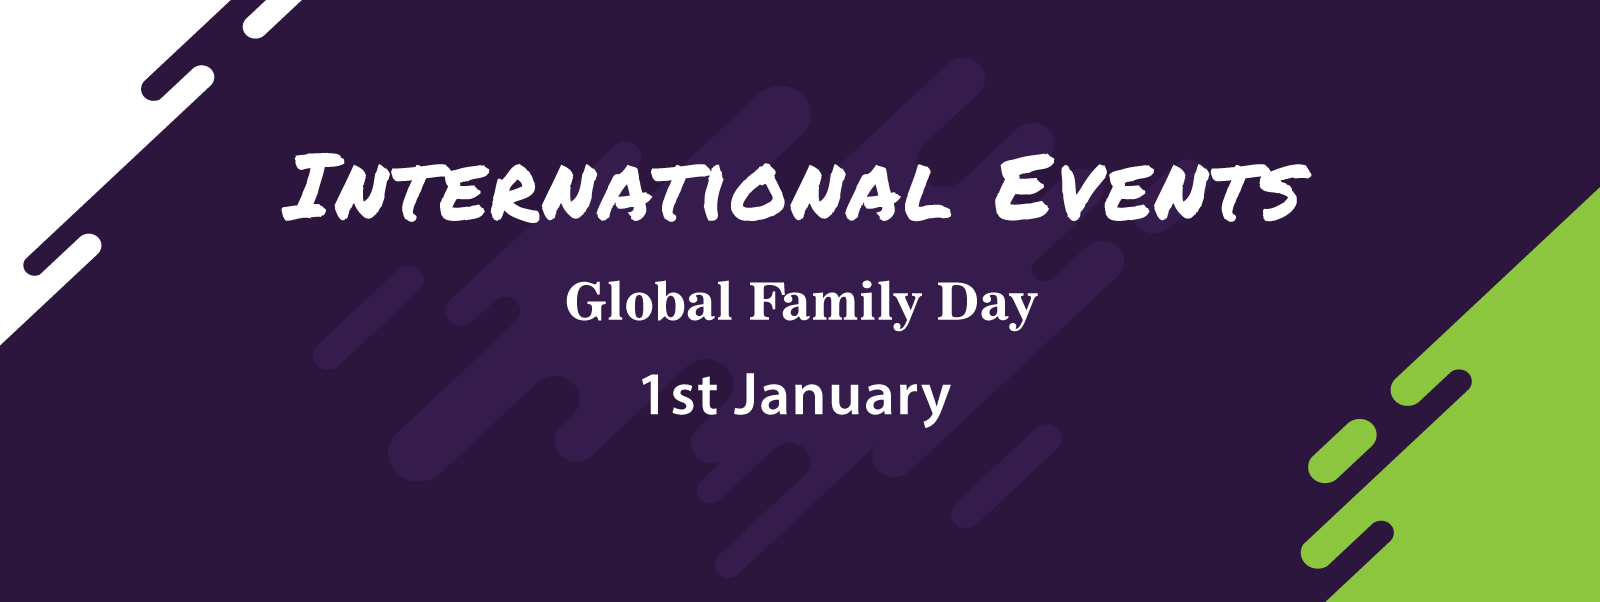 global family day 1st january poster